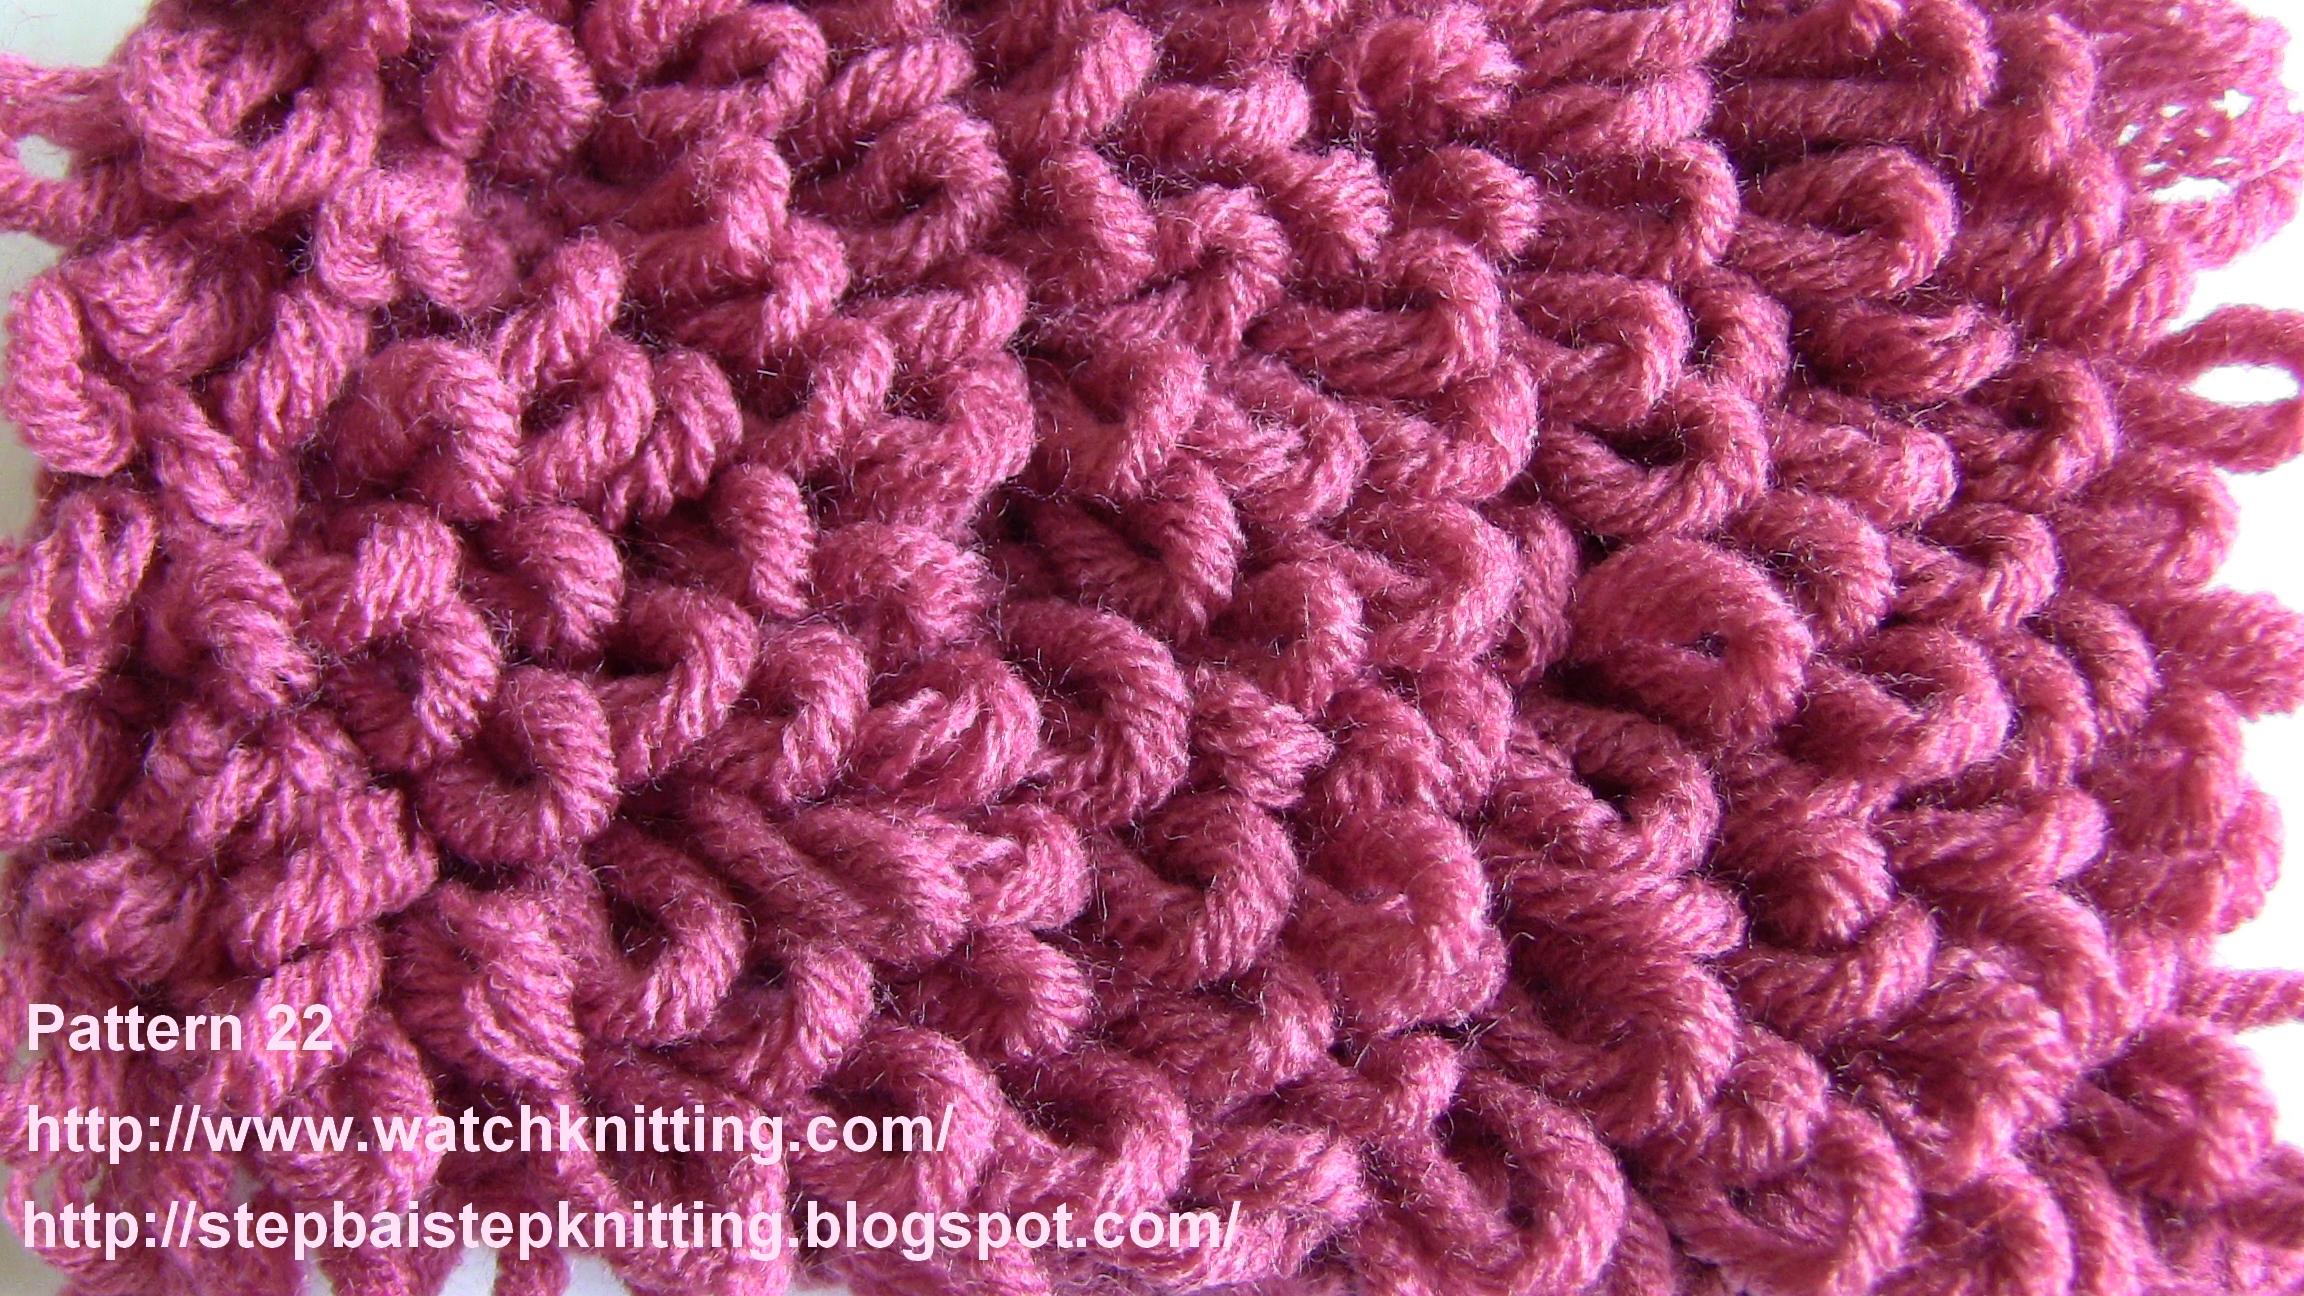 About Knitting Stitches | eHow.com